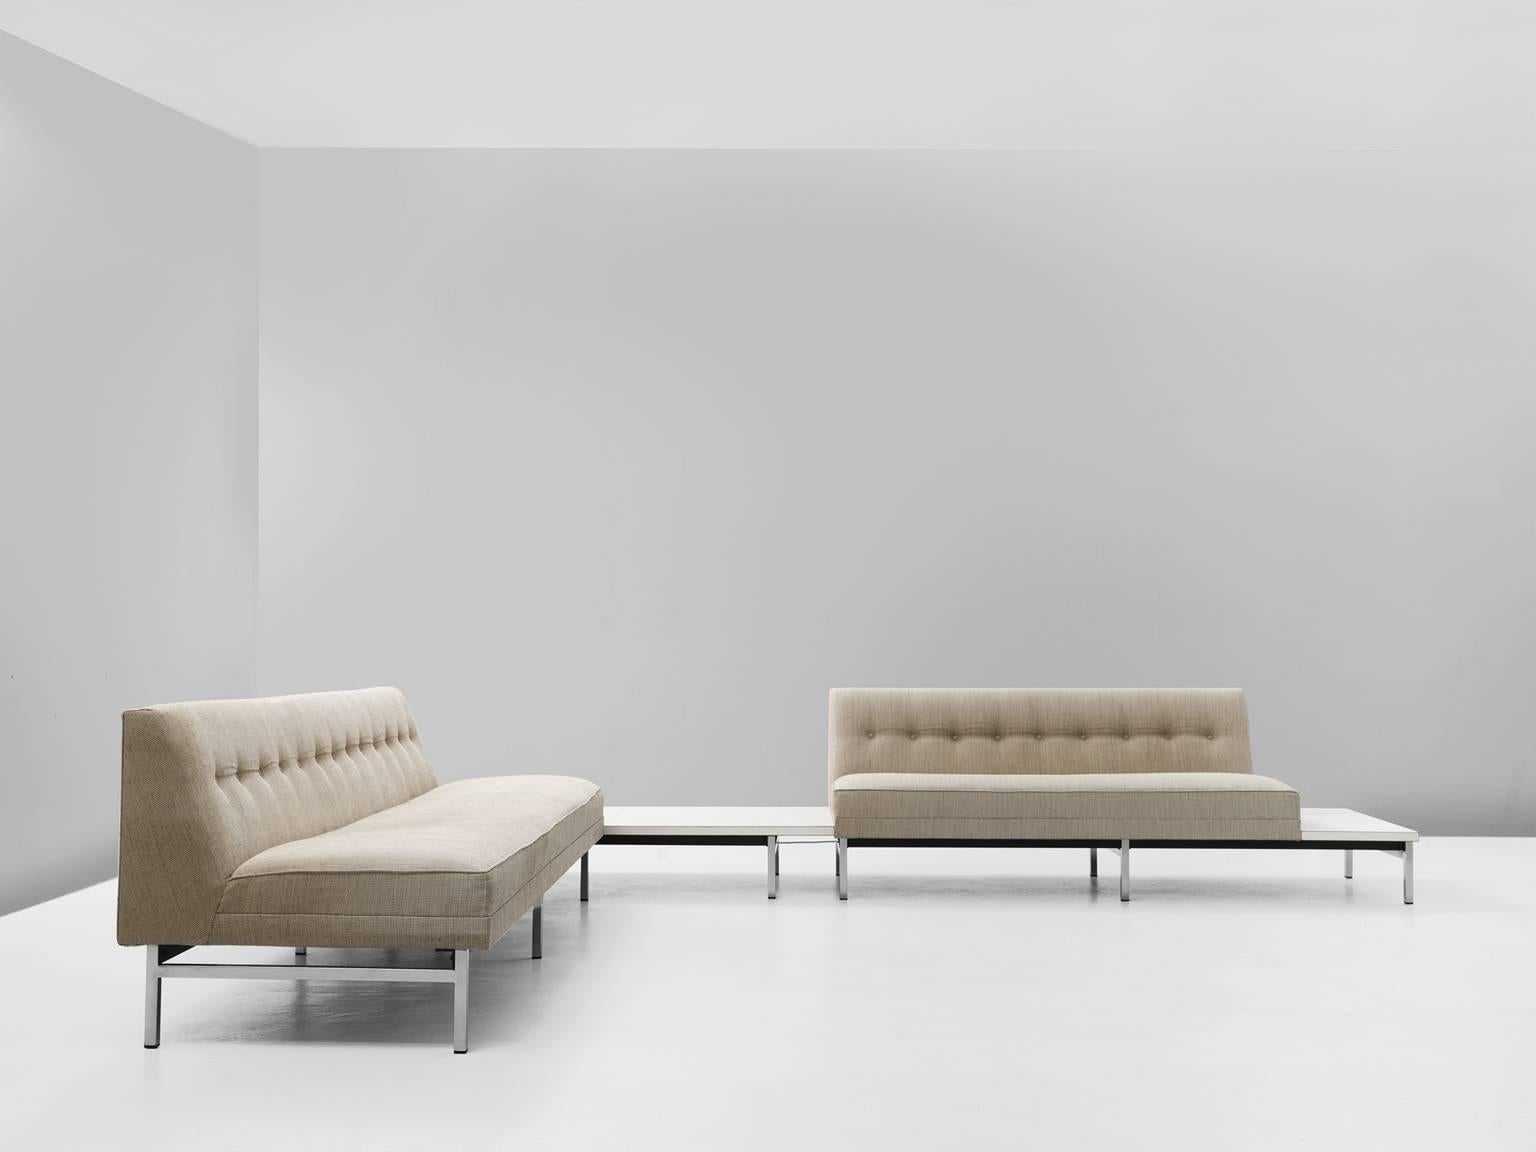 George Nelson for Herman Miller living room set, 1960s, United States.

Very fine living room set by George Nelson (1908-1986) for Herman Miller. This sofa has a metal frame with square chrome-plated legs, the seats are in wonderful thick